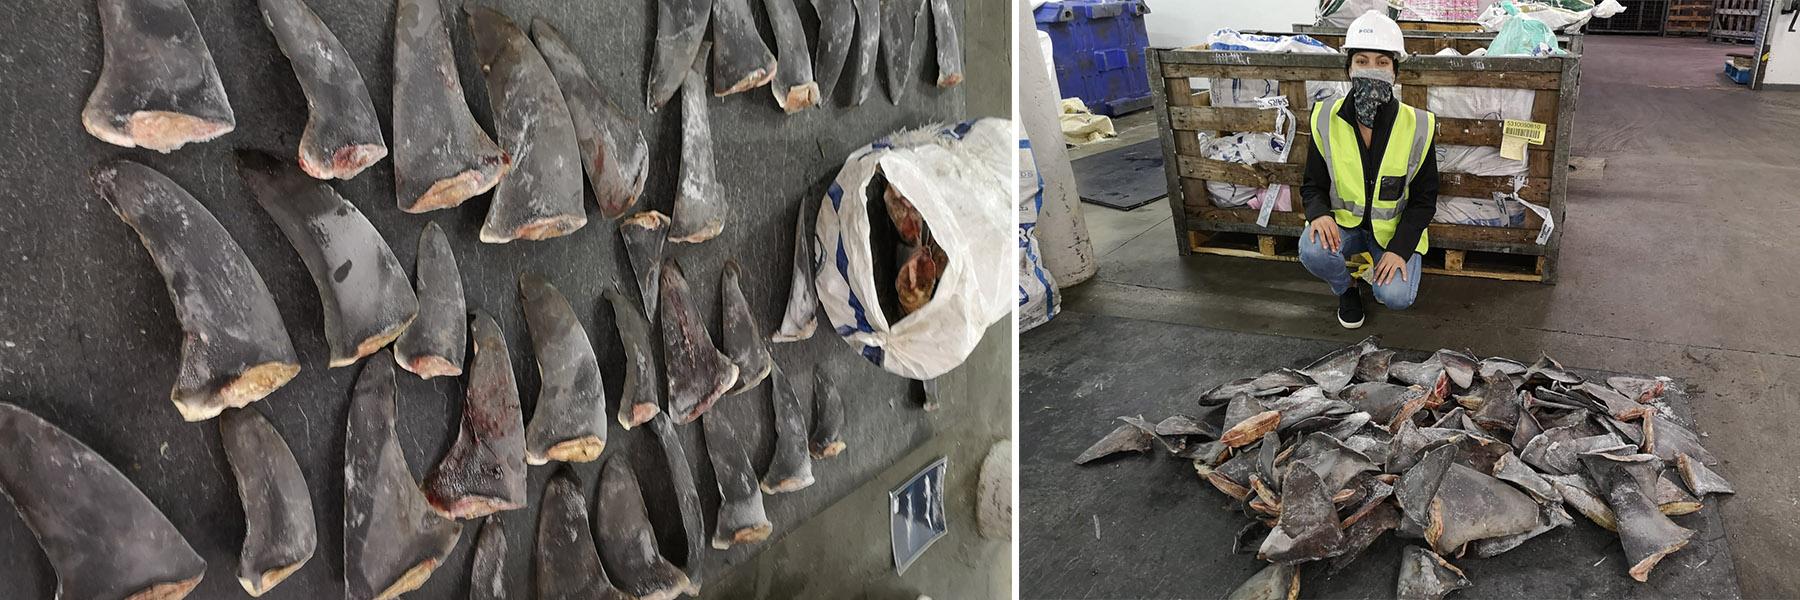 Simone Louw, TRAFFIC's Project Officer in Cape Town inspects a shark fin seizure concerning CITES-listed species. Photo: Markus Bürgener